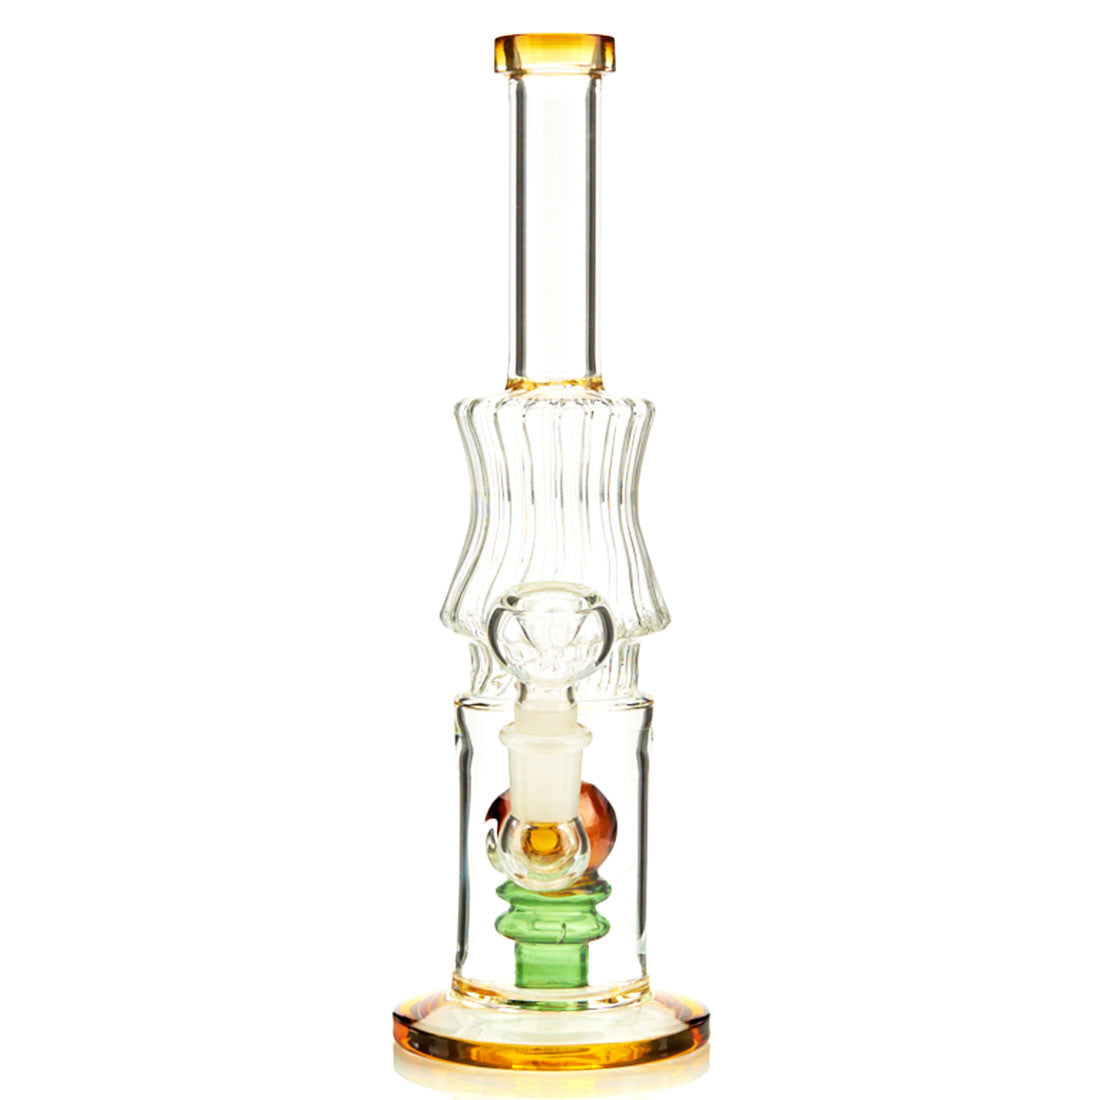 Carnival Water Pipe with Fun Colored Glass and Percolator. Comes with flower bowl 3